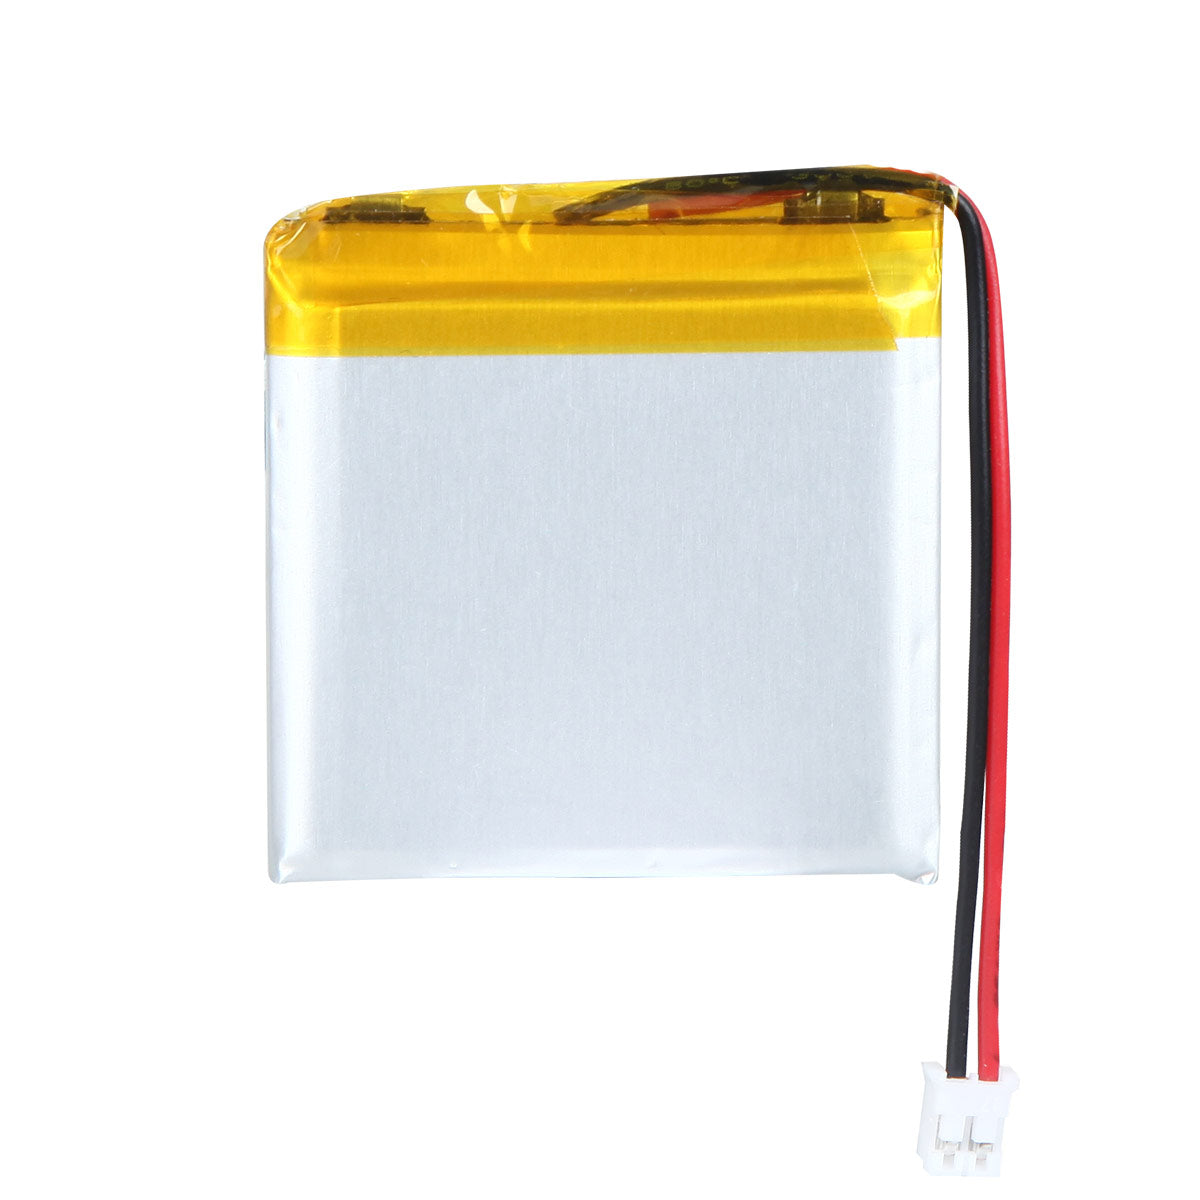 YDL 3.7V 1000mAh 504040 Rechargeable Lithium Polymer Battery